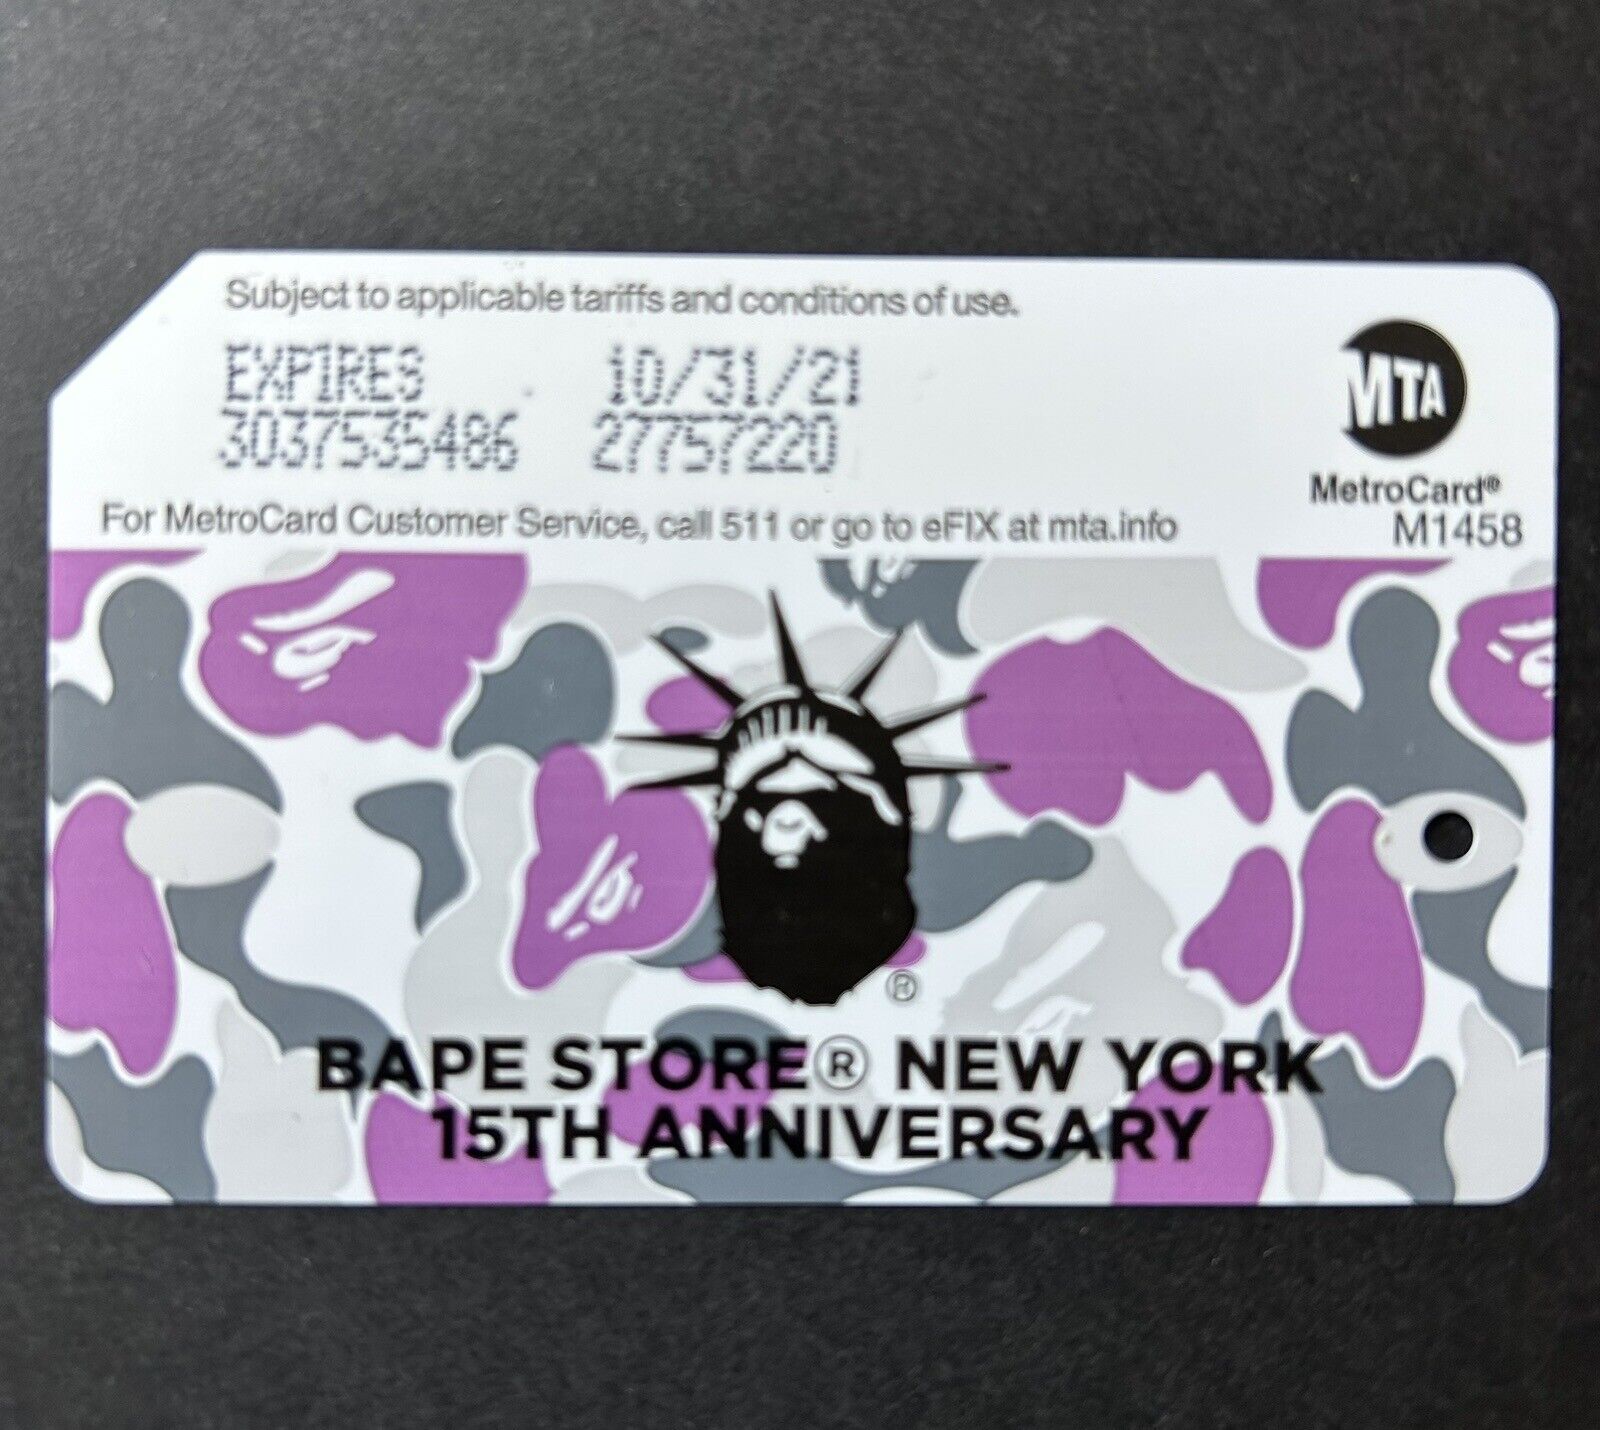 BAPE STORE Limited Edition MetroCard for Collectors Only